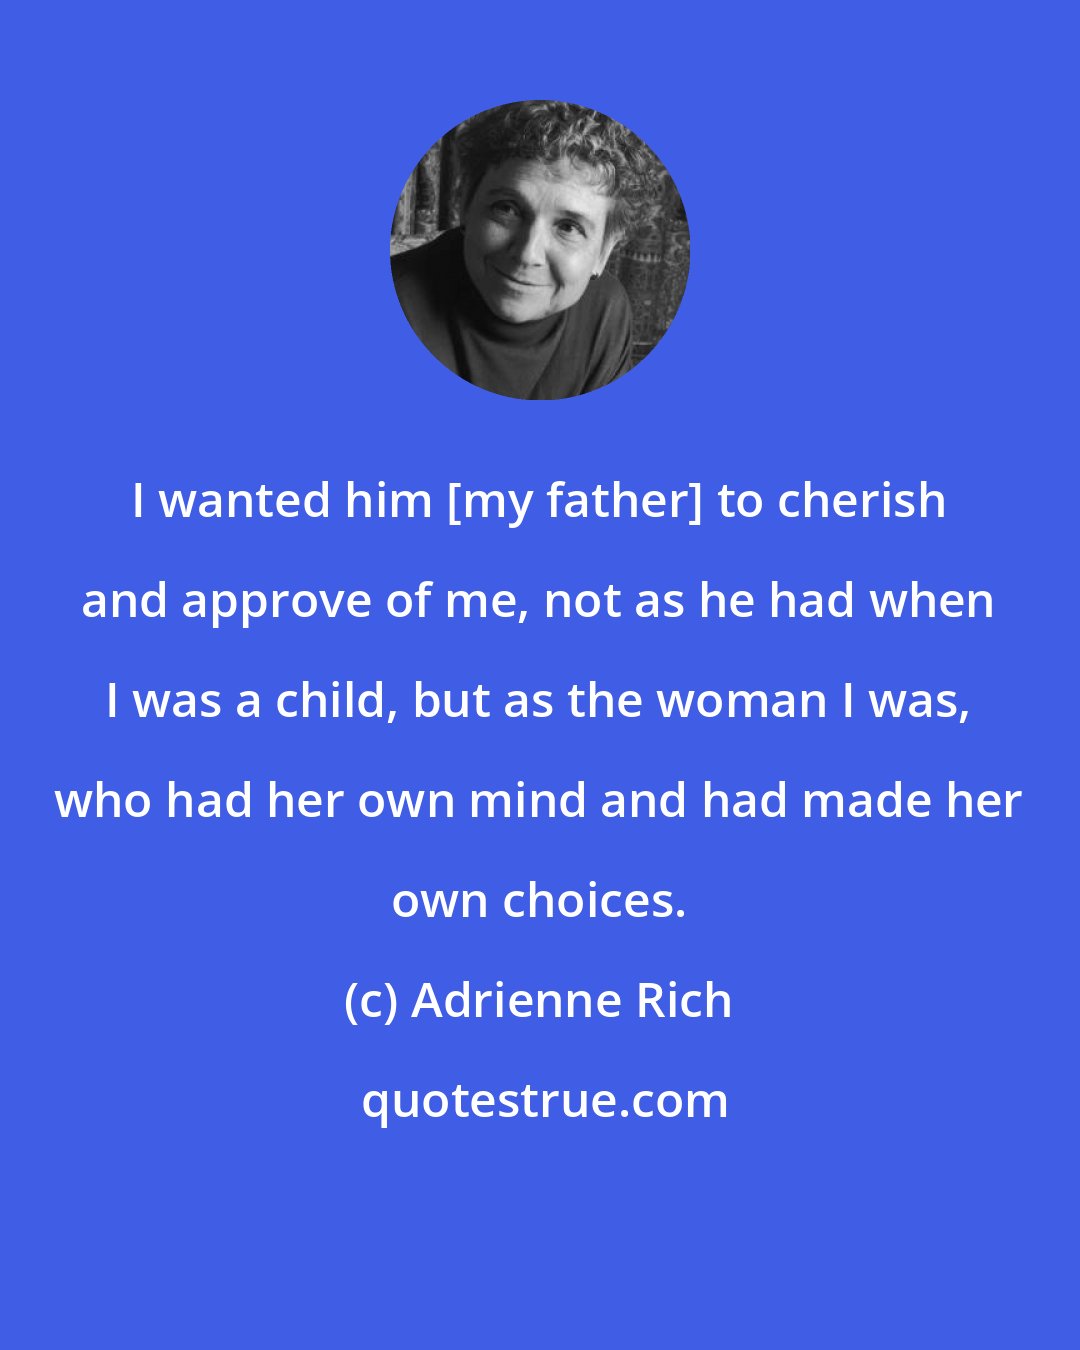 Adrienne Rich: I wanted him [my father] to cherish and approve of me, not as he had when I was a child, but as the woman I was, who had her own mind and had made her own choices.